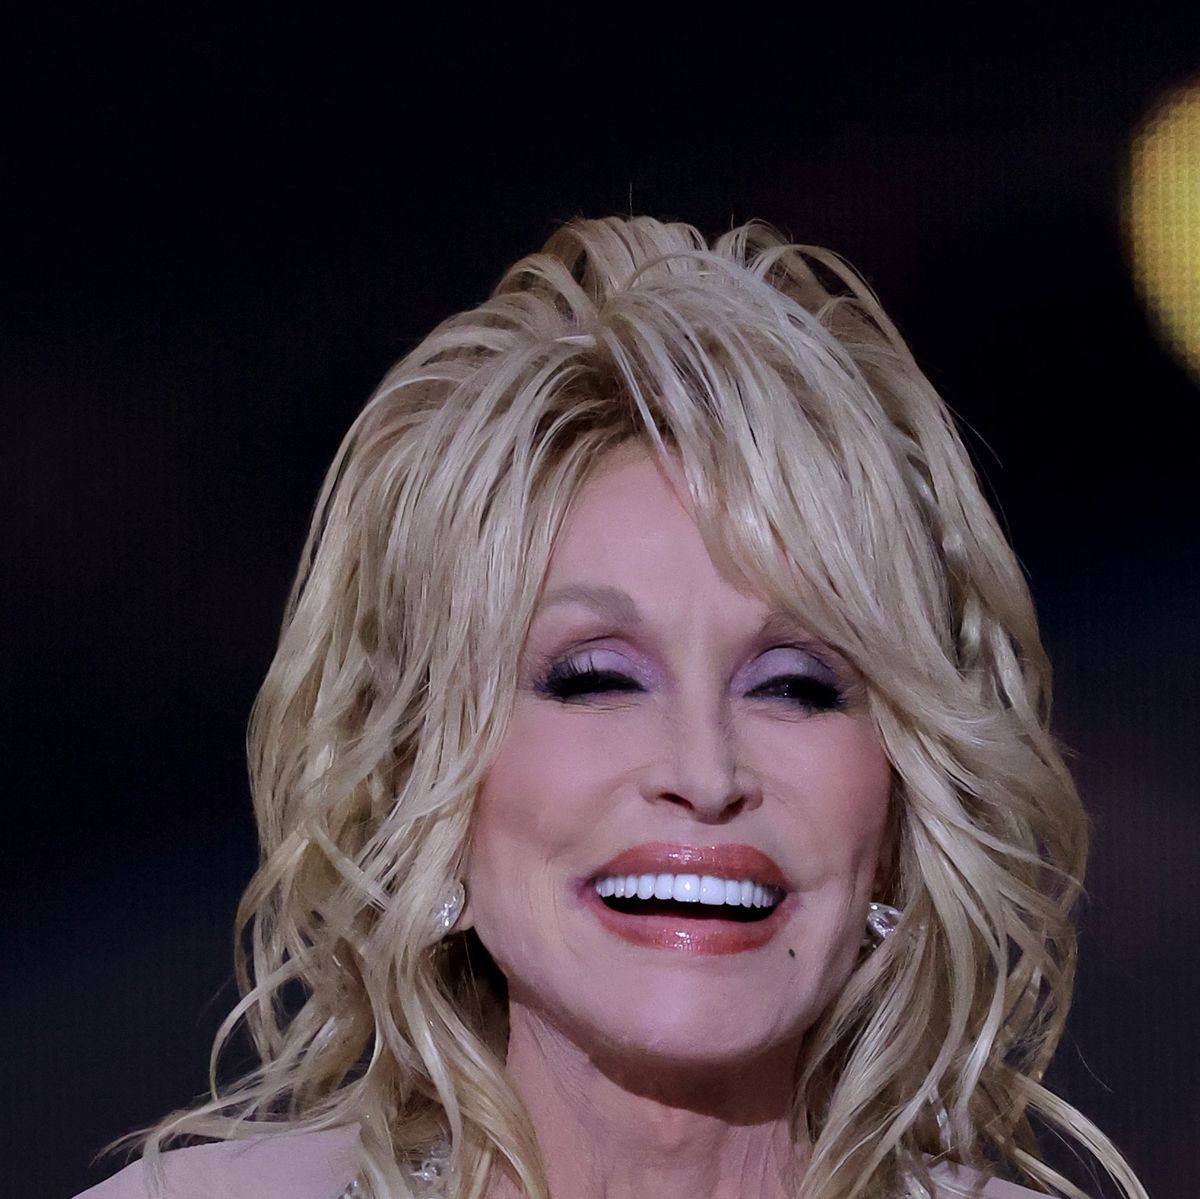 Dolly Parton Analsex Com - See Dolly Parton's Form-Fitting, See-Through Dress from New Year's Eve